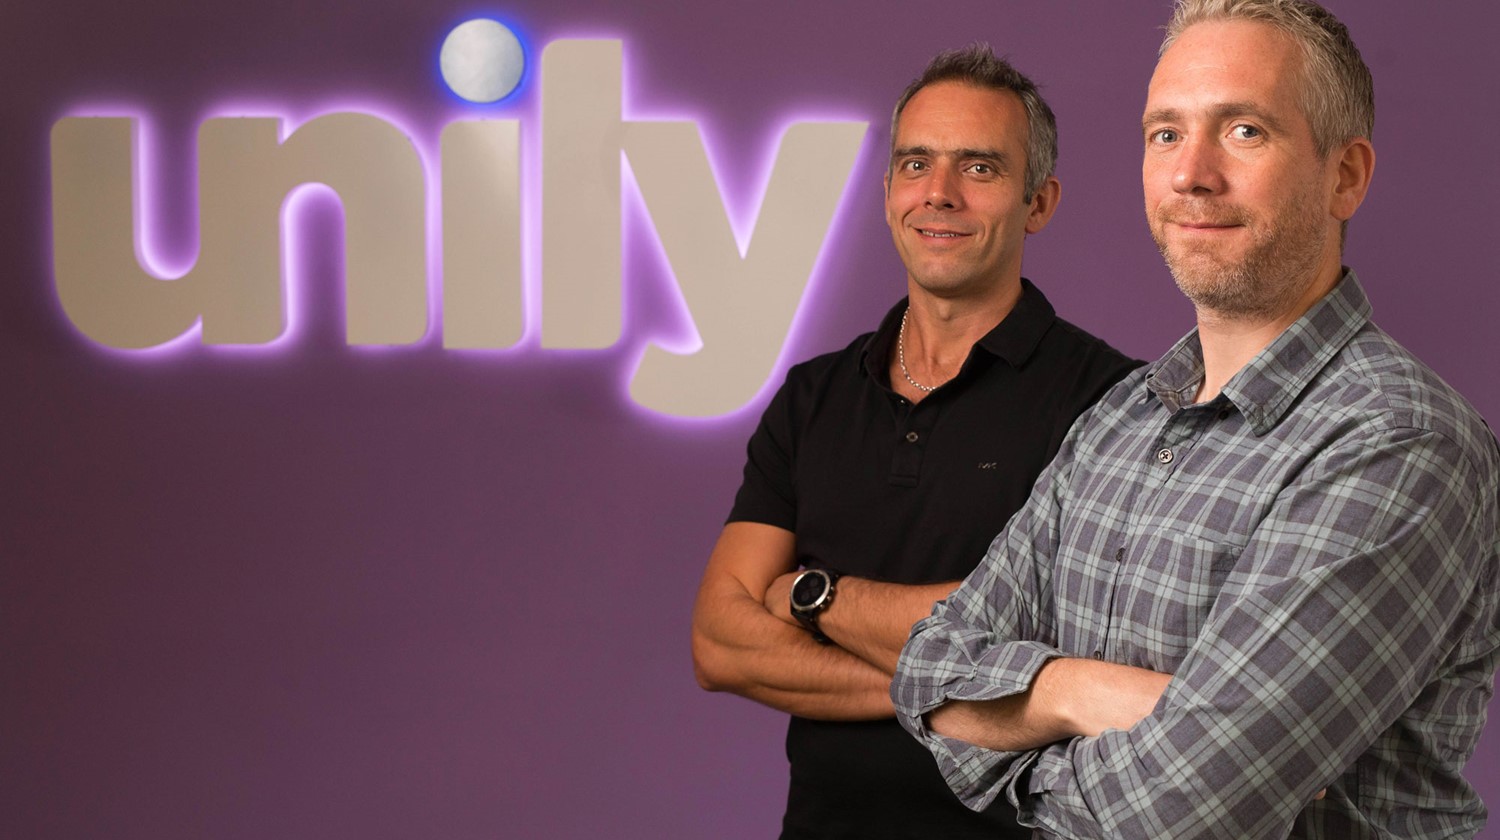  Unily secures £53.65 million Series A investment from Silversmith Capital Partners and Farview Equity Partners